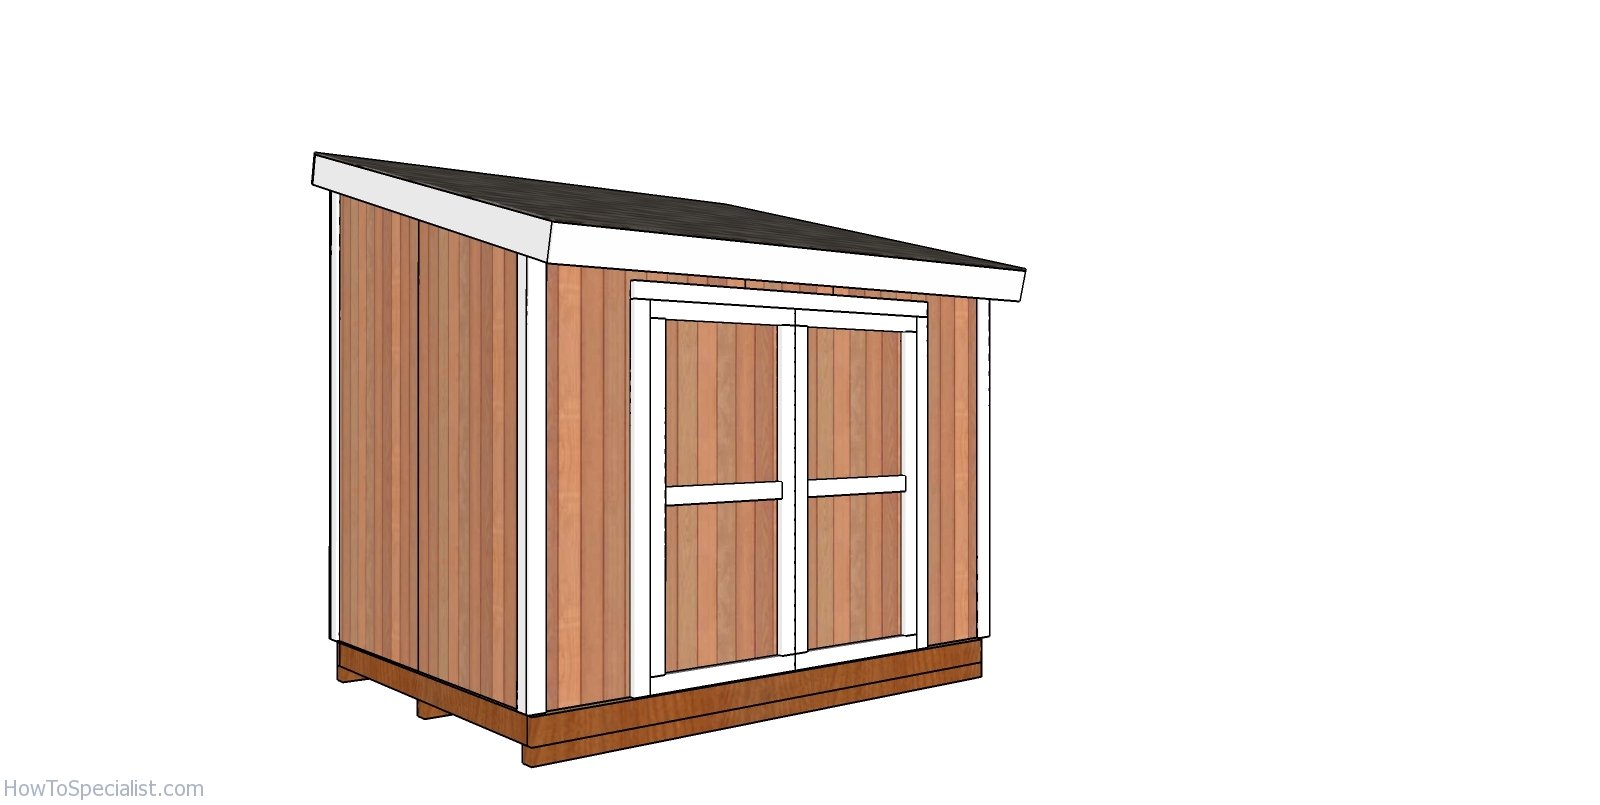 8x10 lean to shed plans - HowToSpecialist